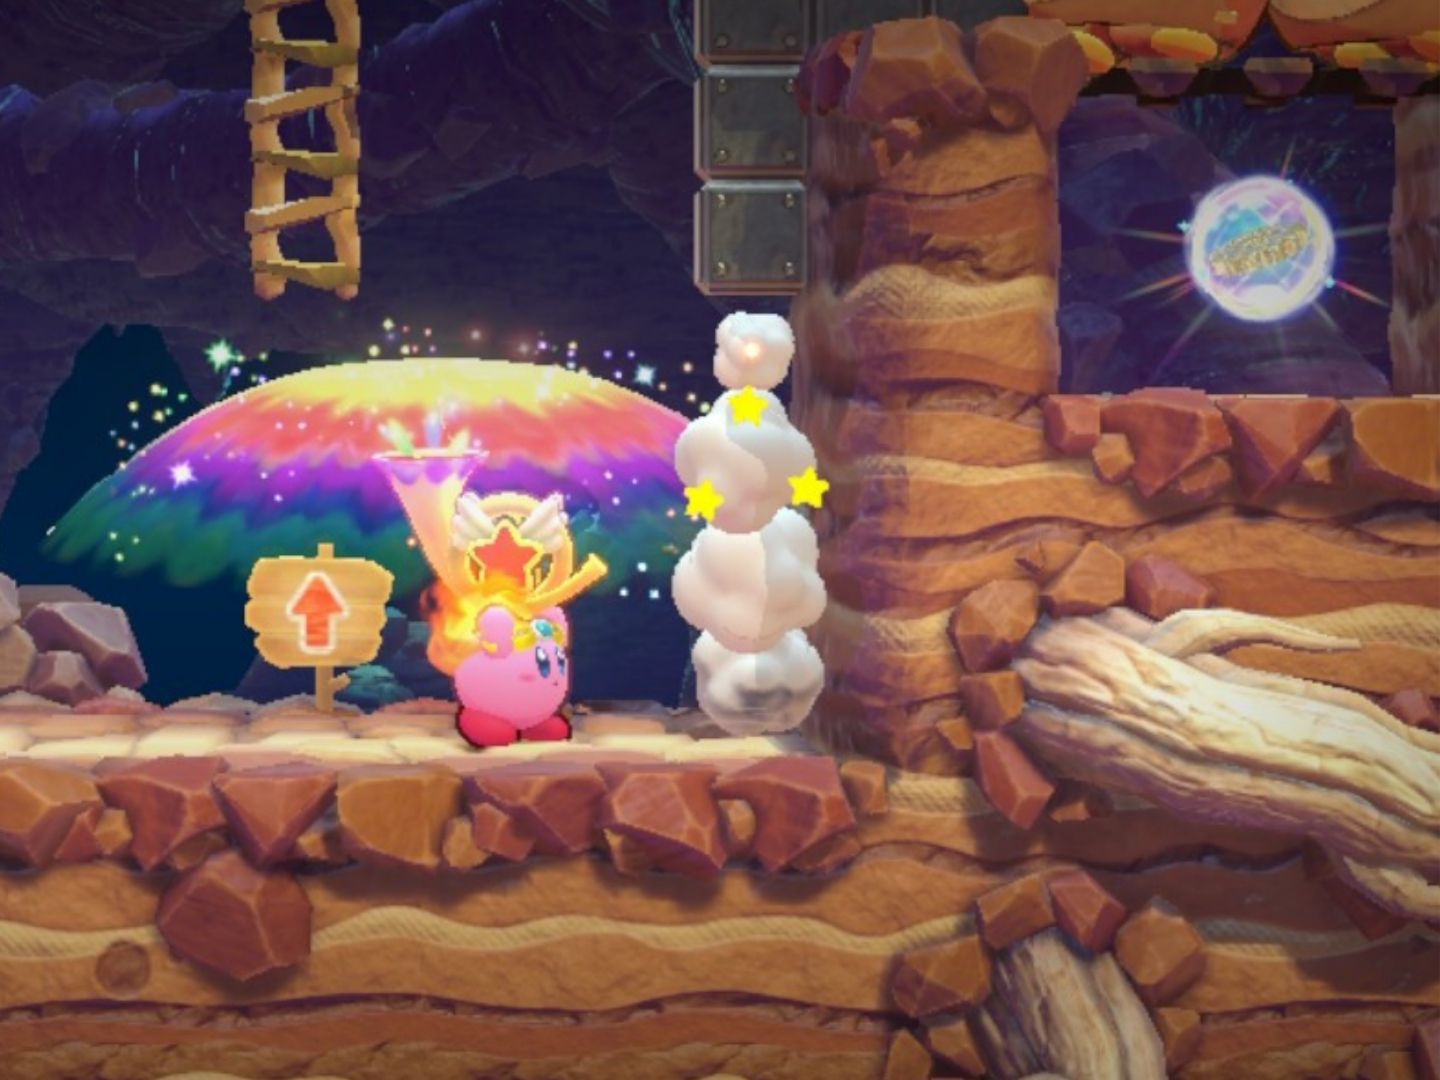 Kirby waits for the blocks to disappear to get the Energy Sphere in Kirby's Return To Dream Land Deluxe.